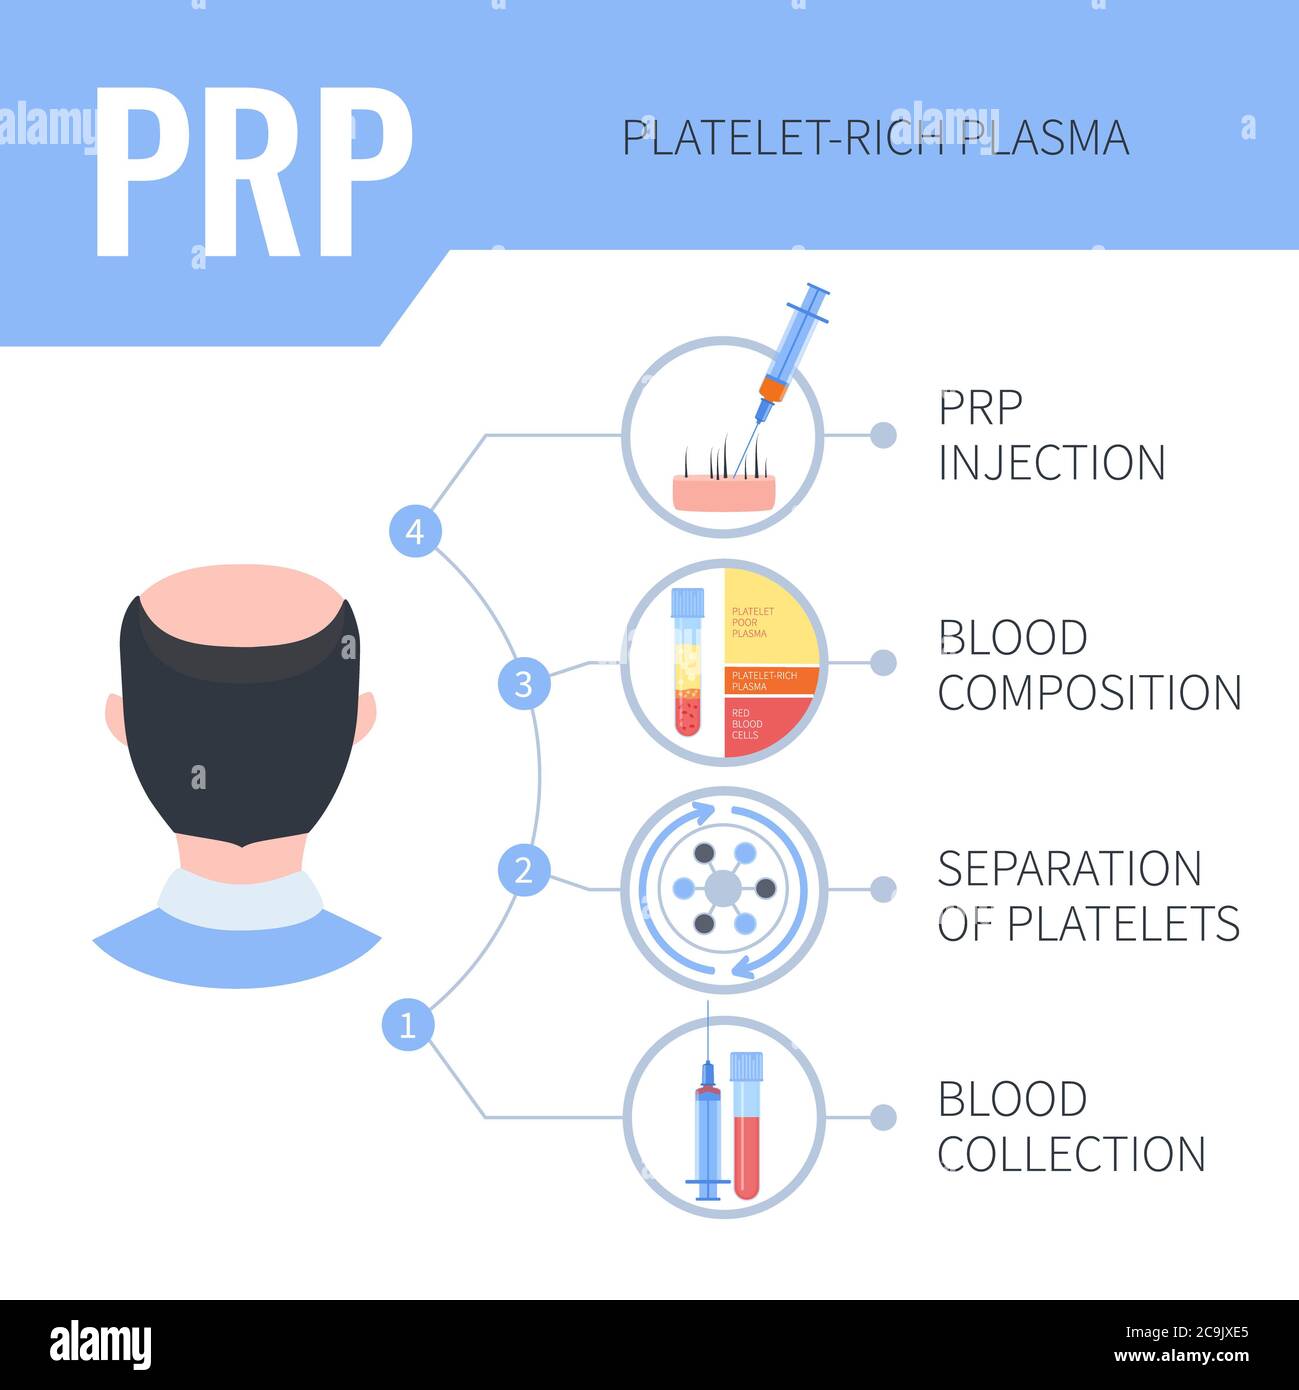 Platelet-rich plasma (PRP) hair regrowth therapy in men, illustration. Stock Photo